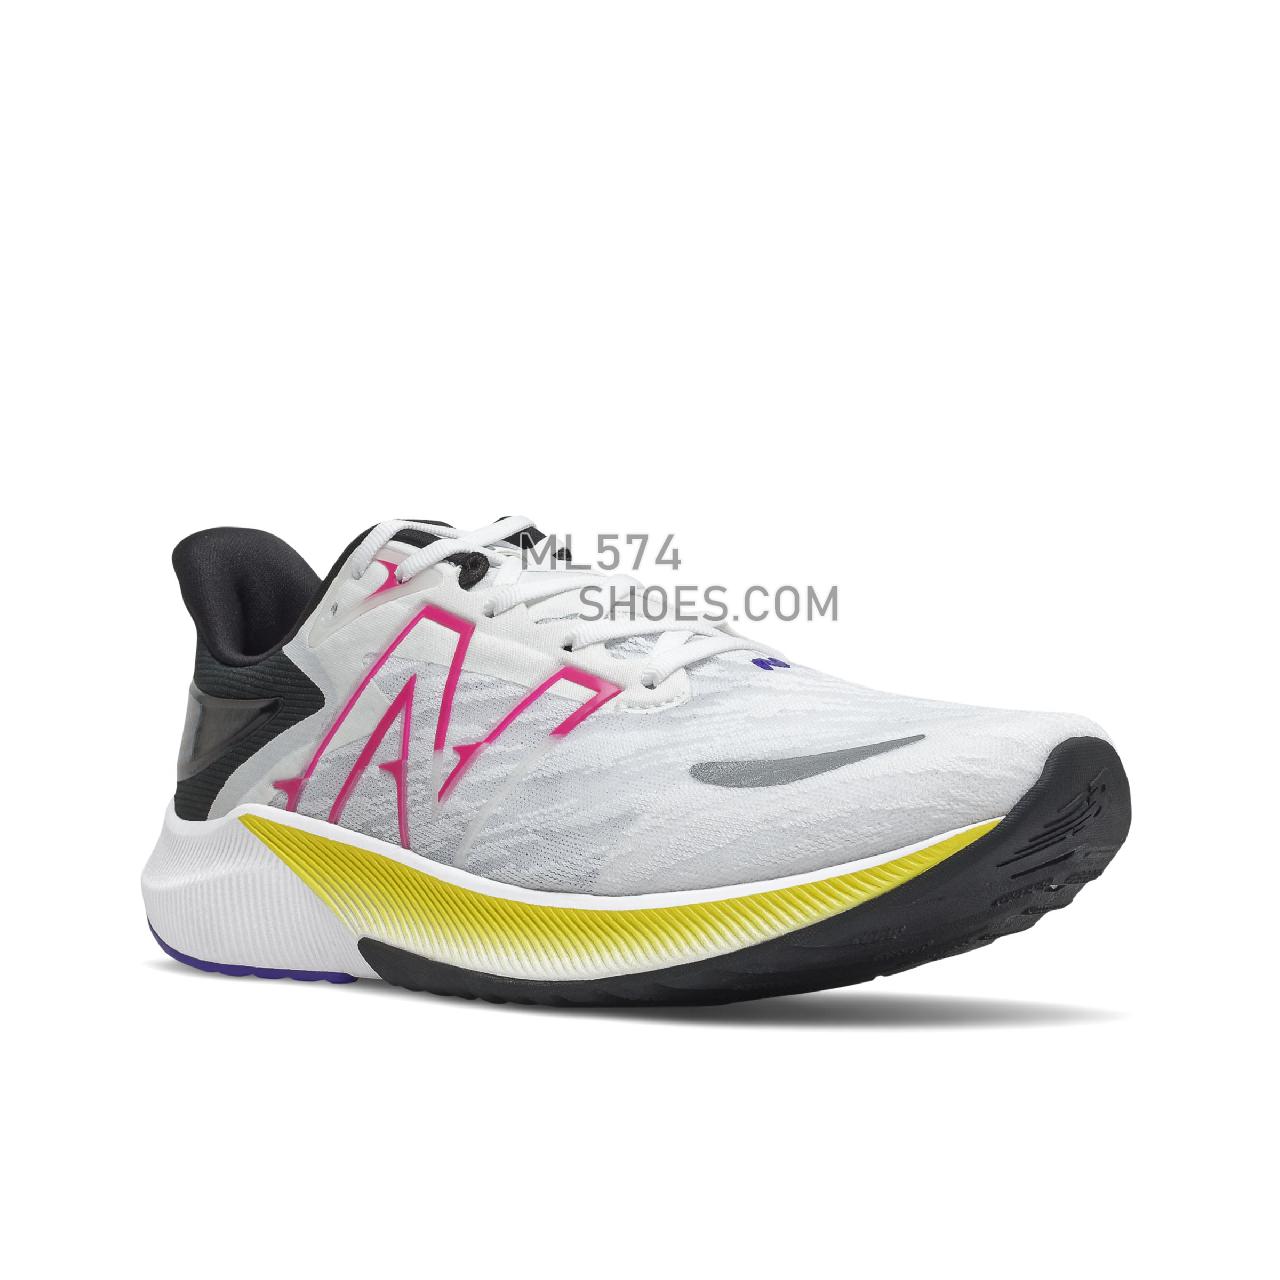 New Balance FuelCell Propel v3 - Men's Neutral Running - White with Pink Glo and Deep Violet - MFCPRLM3